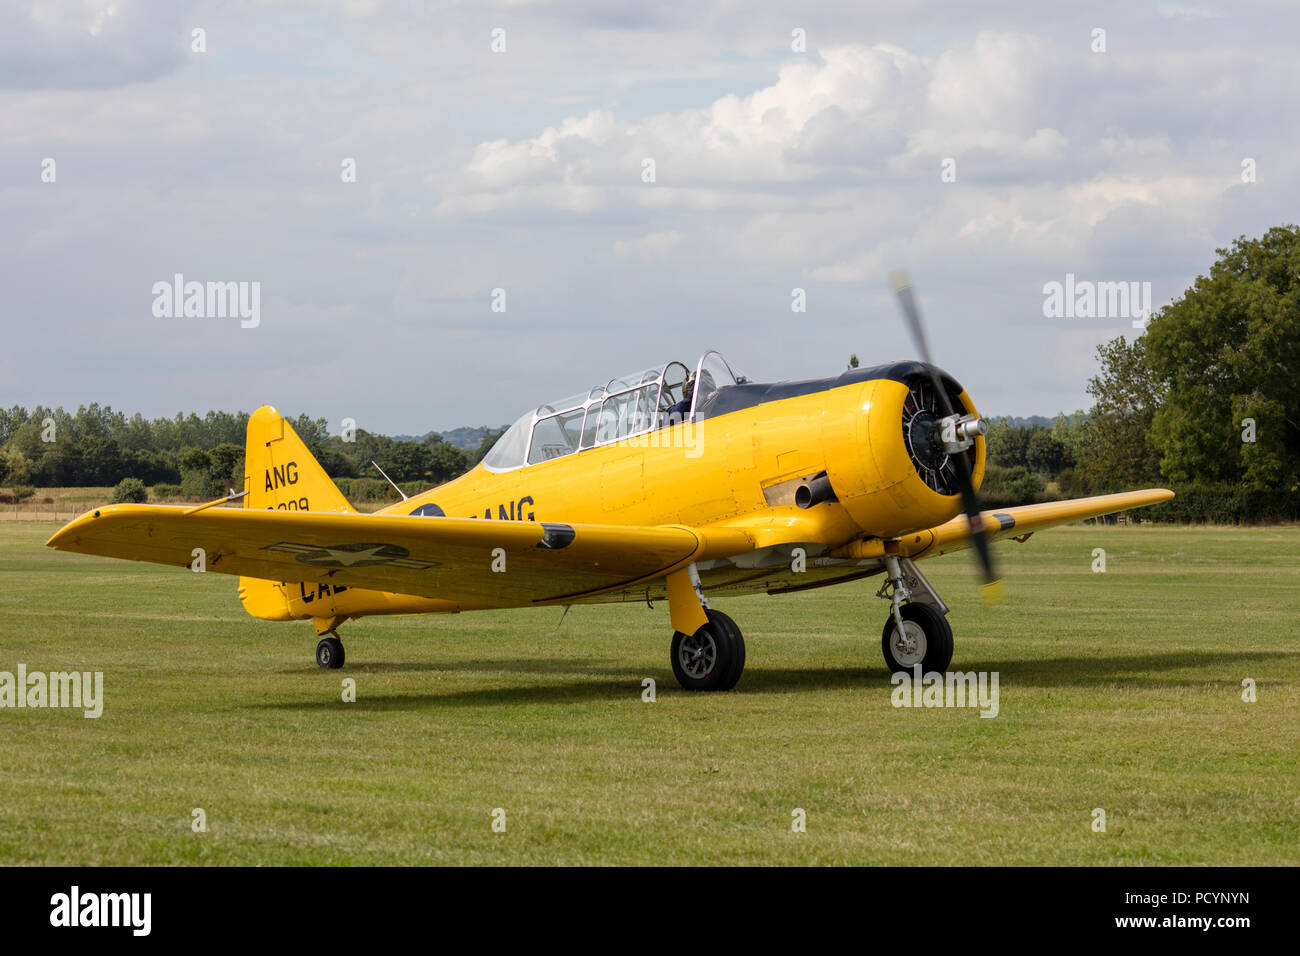 Front view of a historic North American T-6 Texan Harvard aeroplane Stock Photo